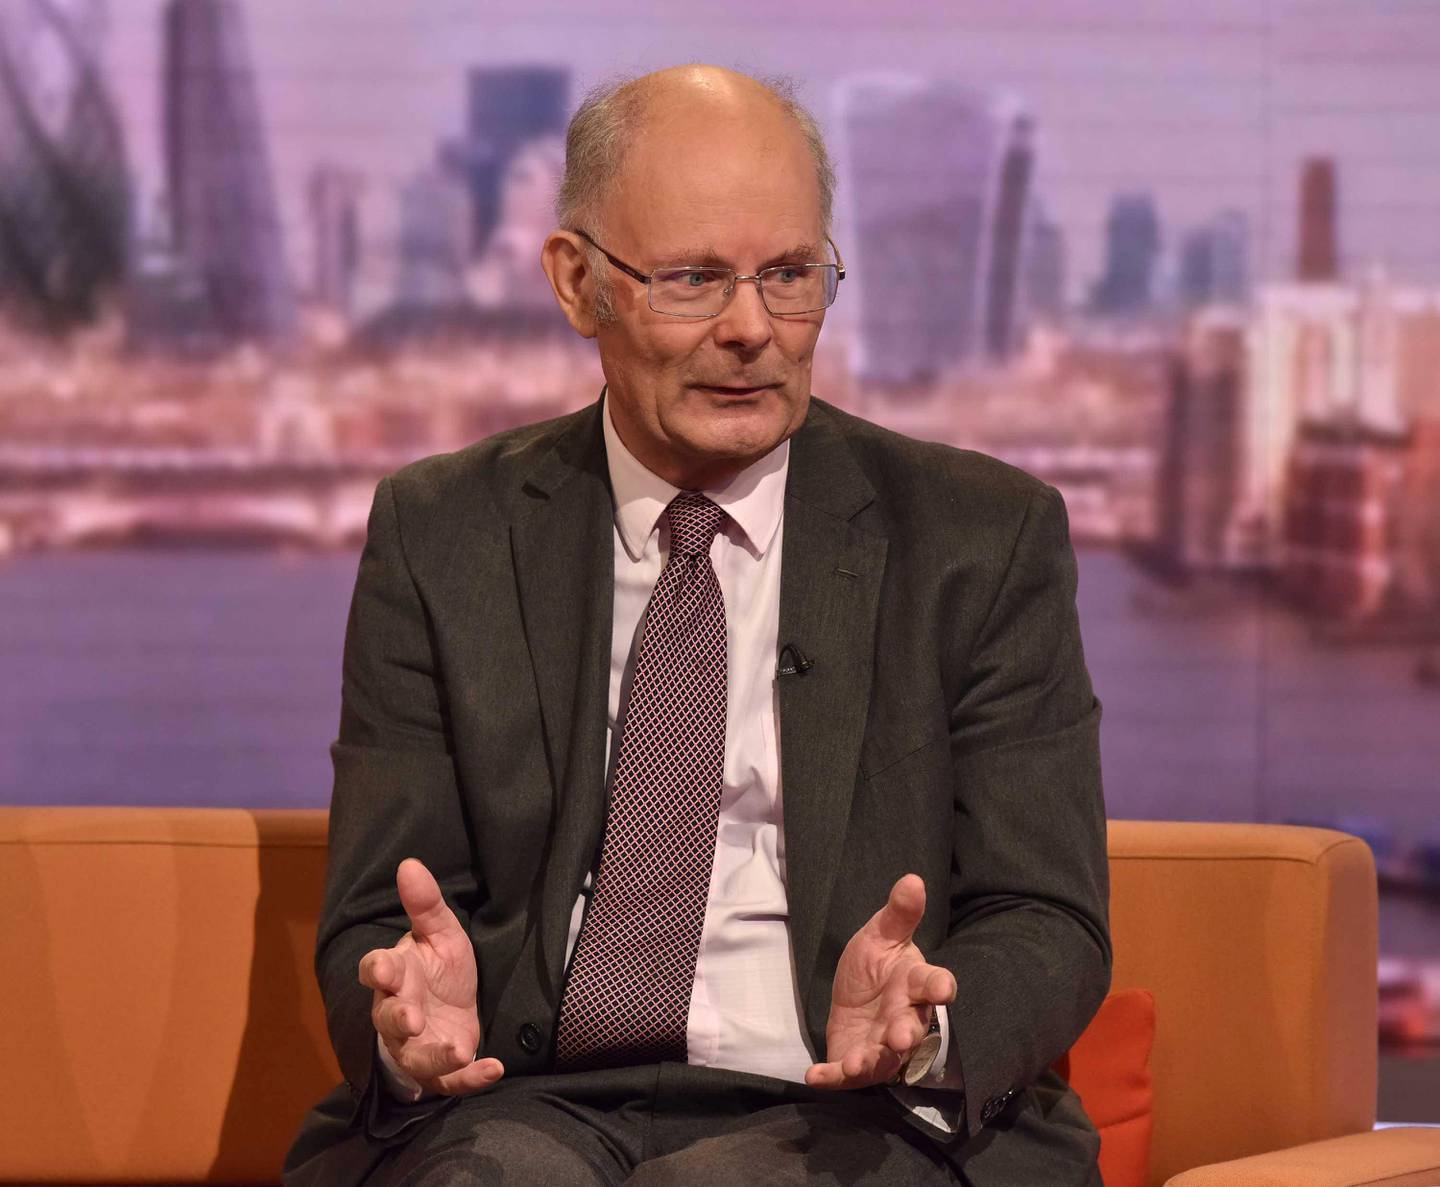 Professor John Curtice, Strathclyde University, appears on BBC TV's The Andrew Marr Show in London, Britain, October 6, 2019. Jeff Overs/BBC/Handout via REUTERS ATTENTION EDITORS - THIS IMAGE HAS BEEN SUPPLIED BY A THIRD PARTY. NO RESALES. NO ARCHIVES. NOT FOR USE MORE THAN 21 DAYS AFTER ISSUE. MANDATORY CREDIT.